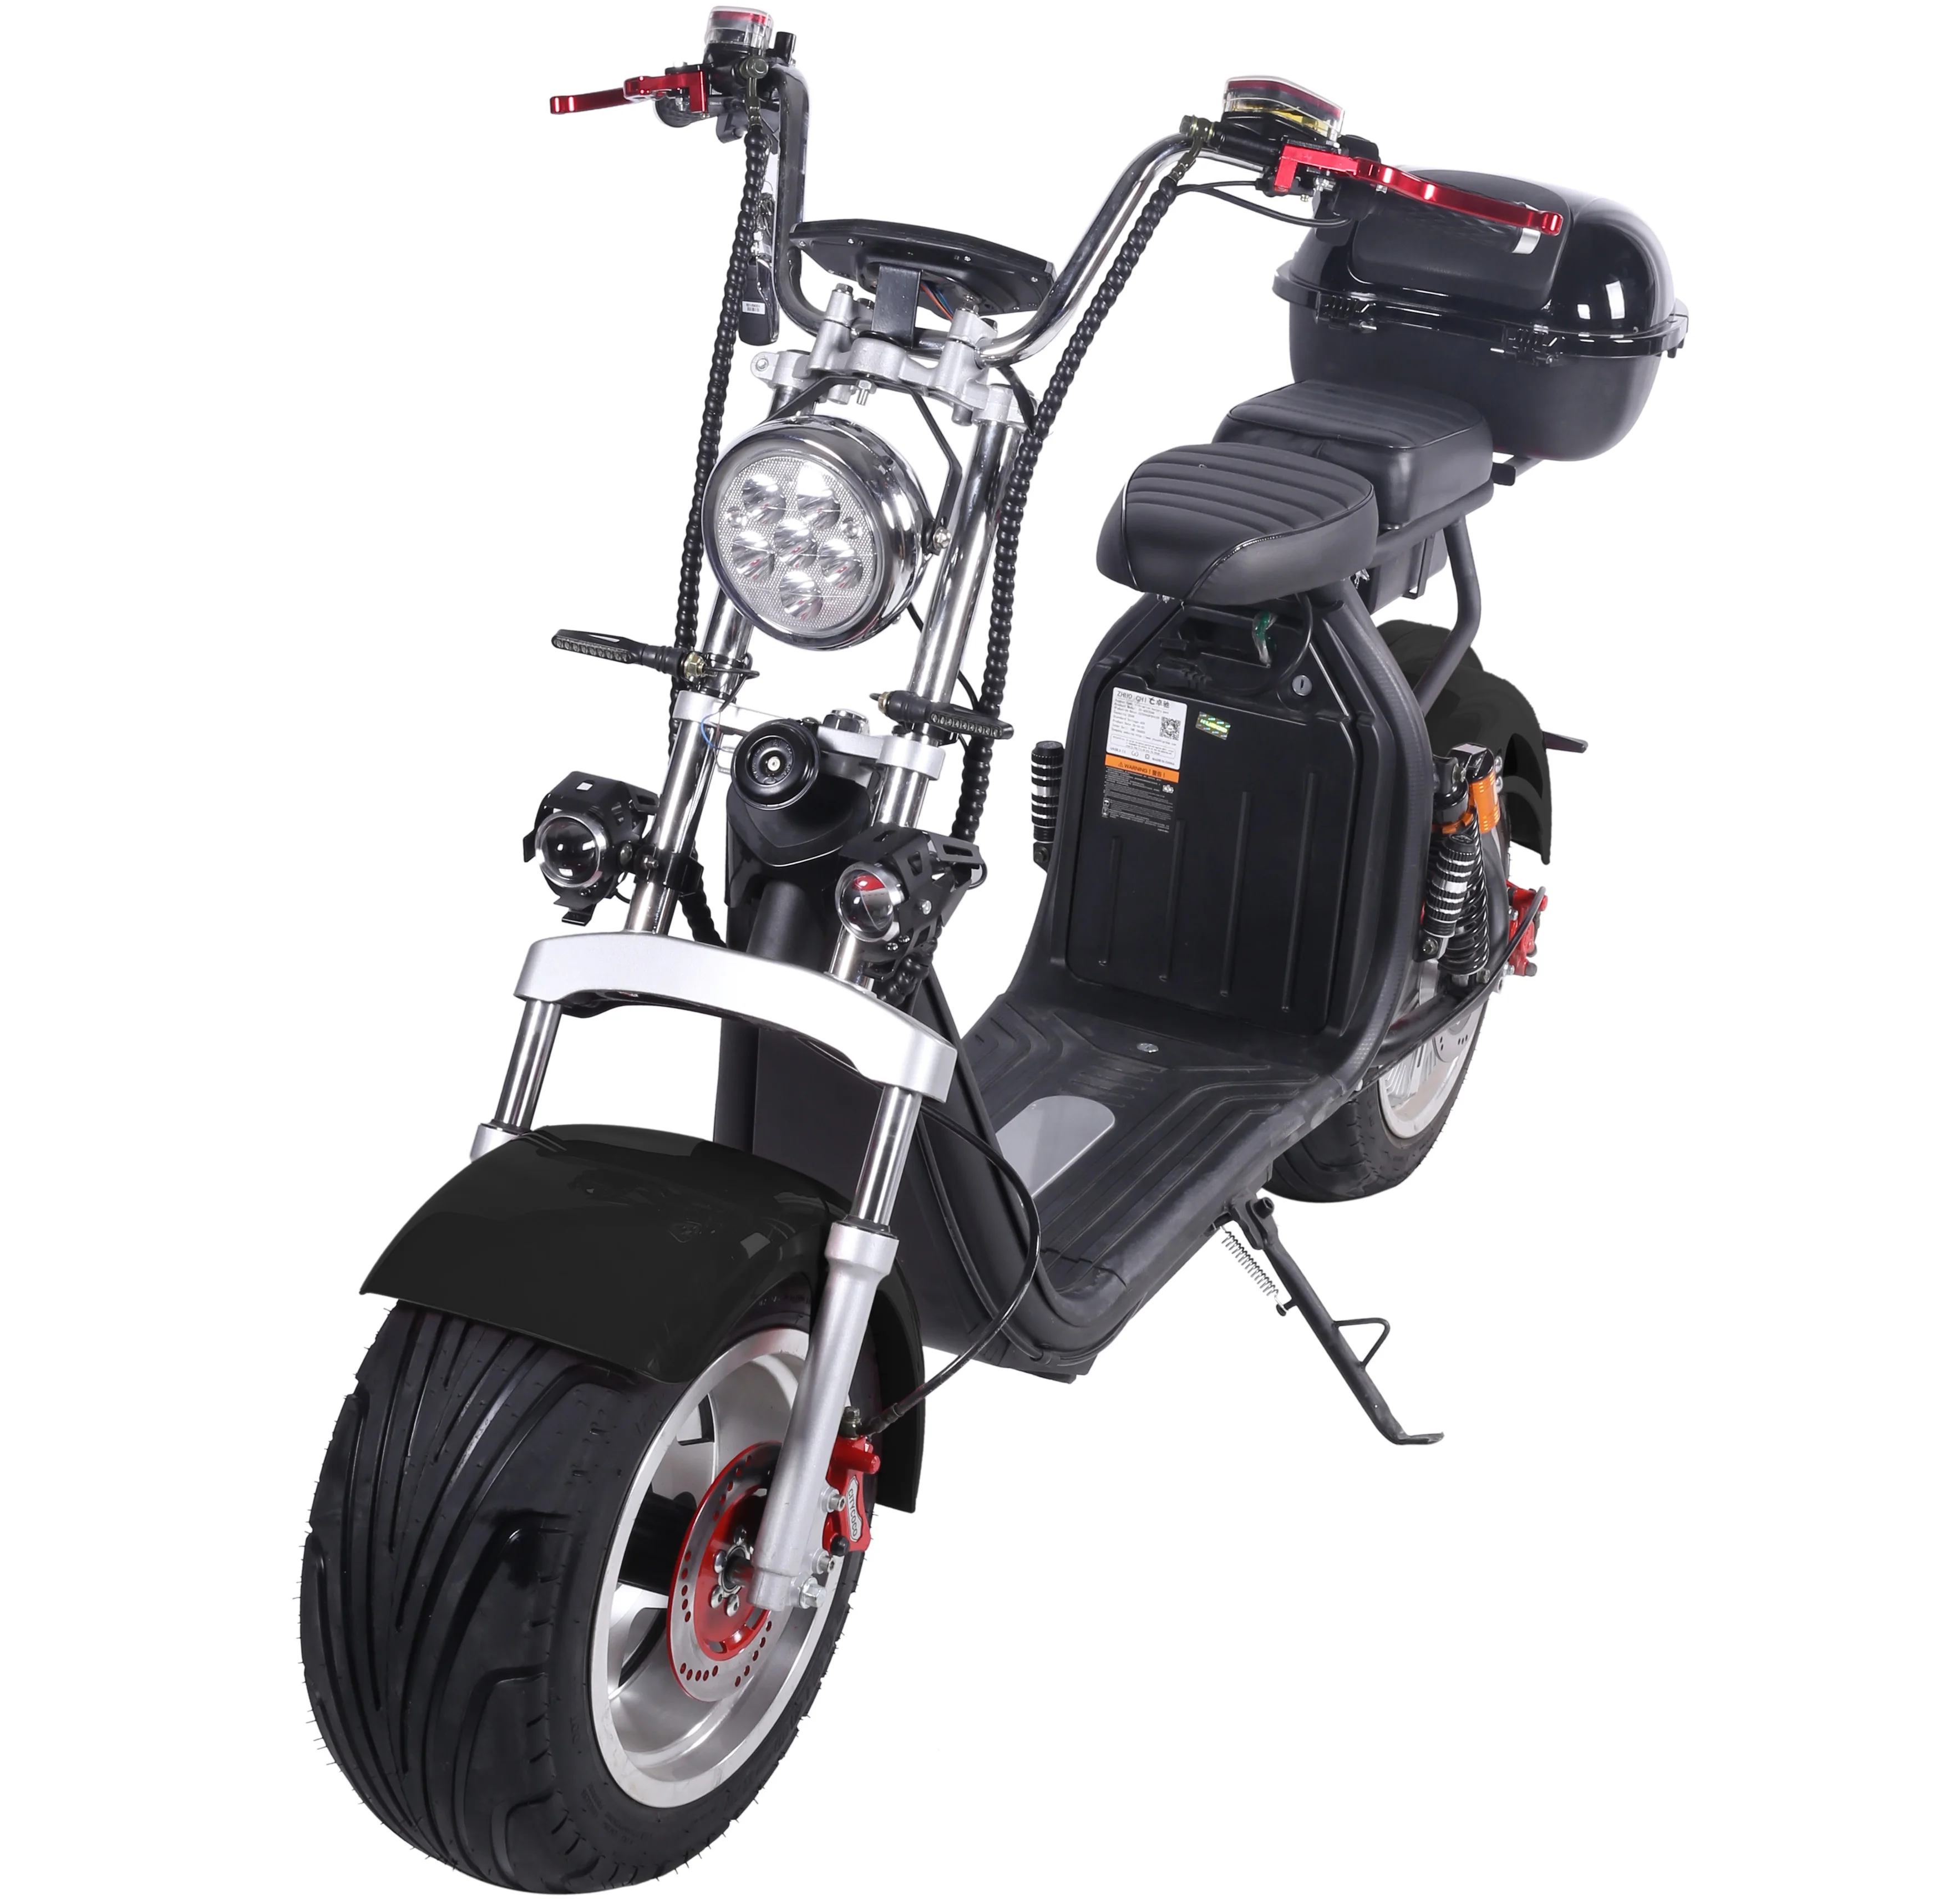 europe EEC City coco Electric Scooter 1000w seev citycoco 2000w 3000w electric scooter with fat tire scooter bike 80km/h